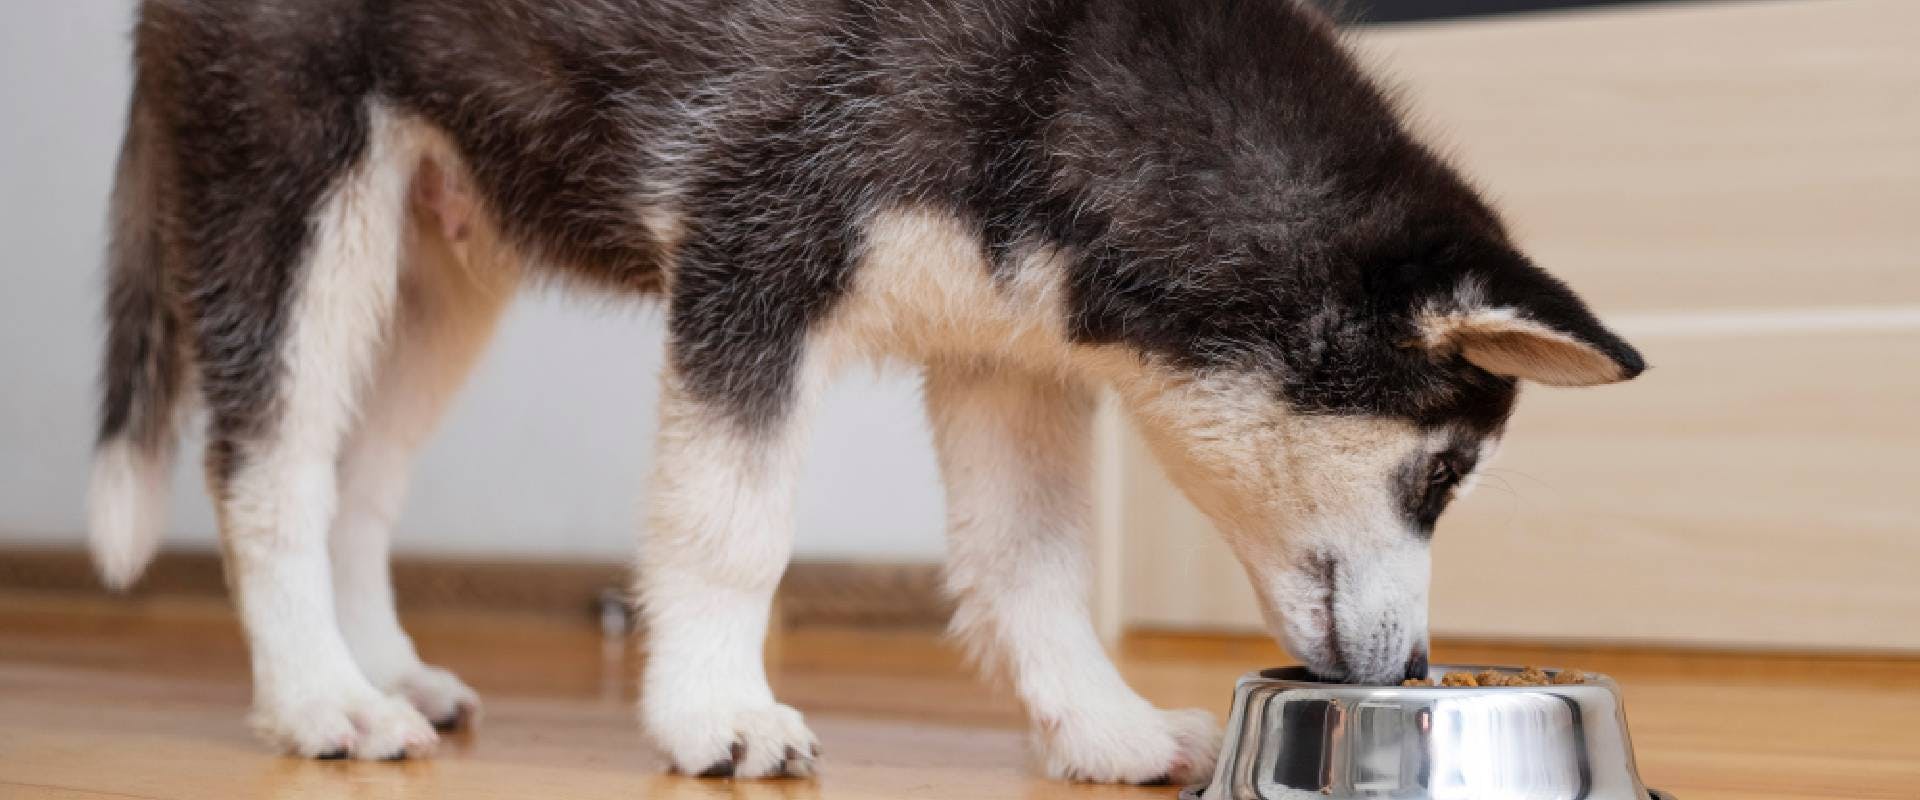 Husky puppy eating from a metal bowl